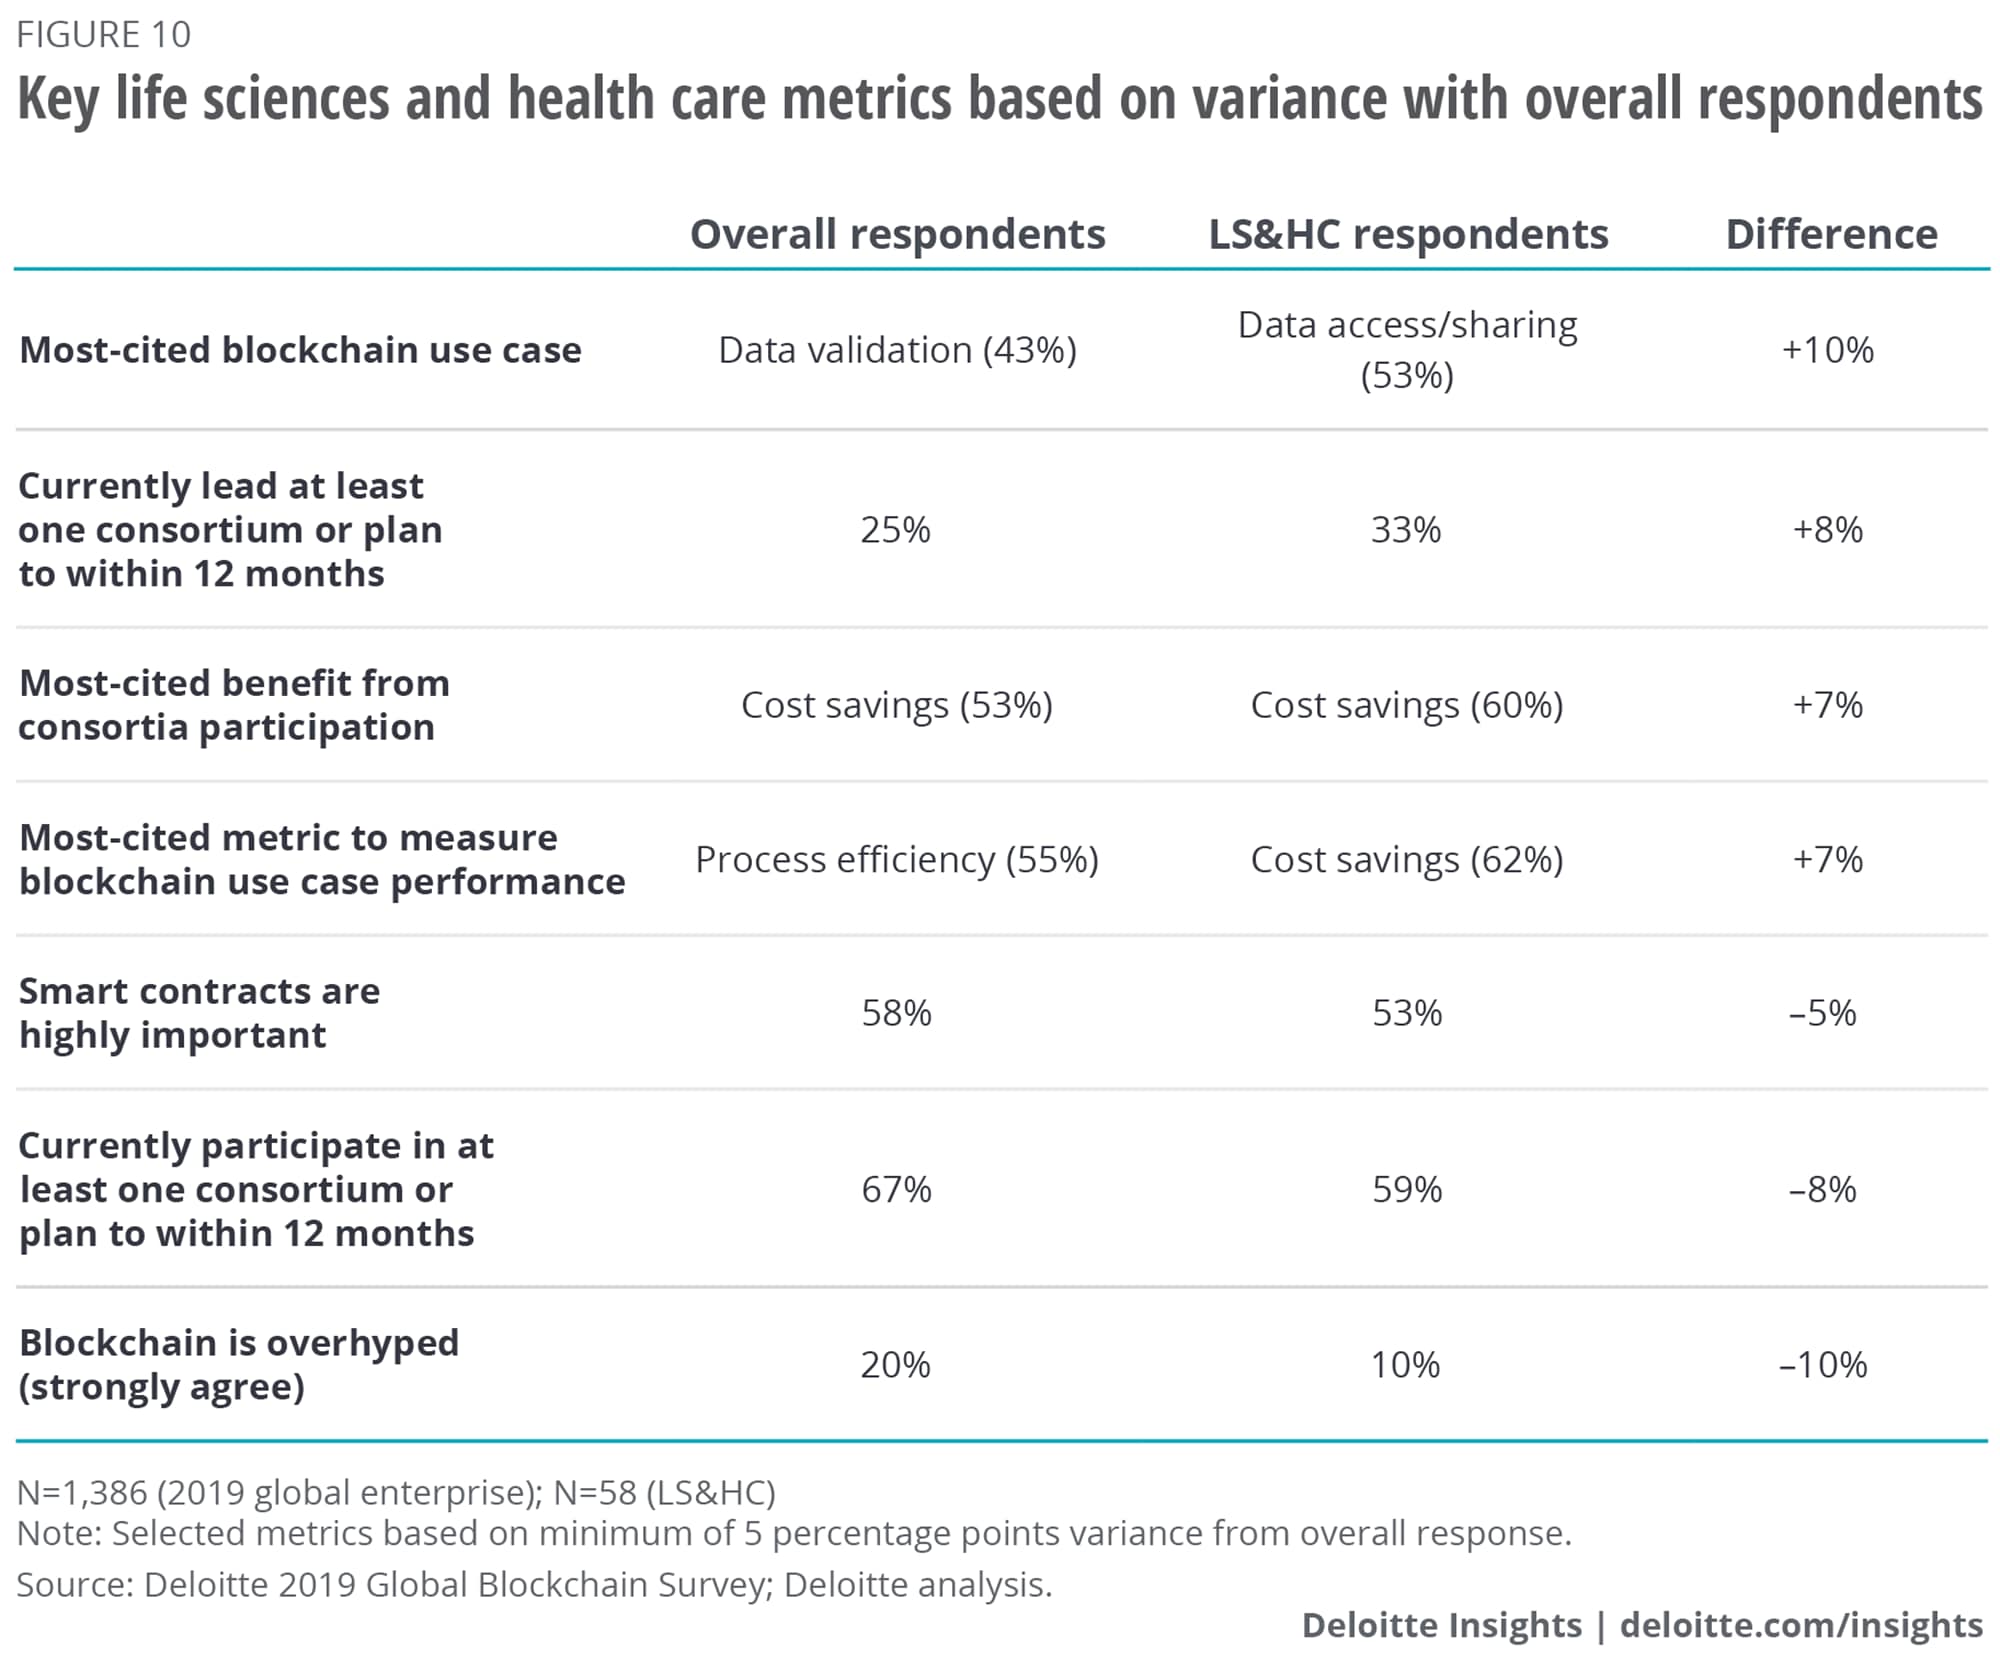 Key life sciences and health care metrics based on variance with overall respondents